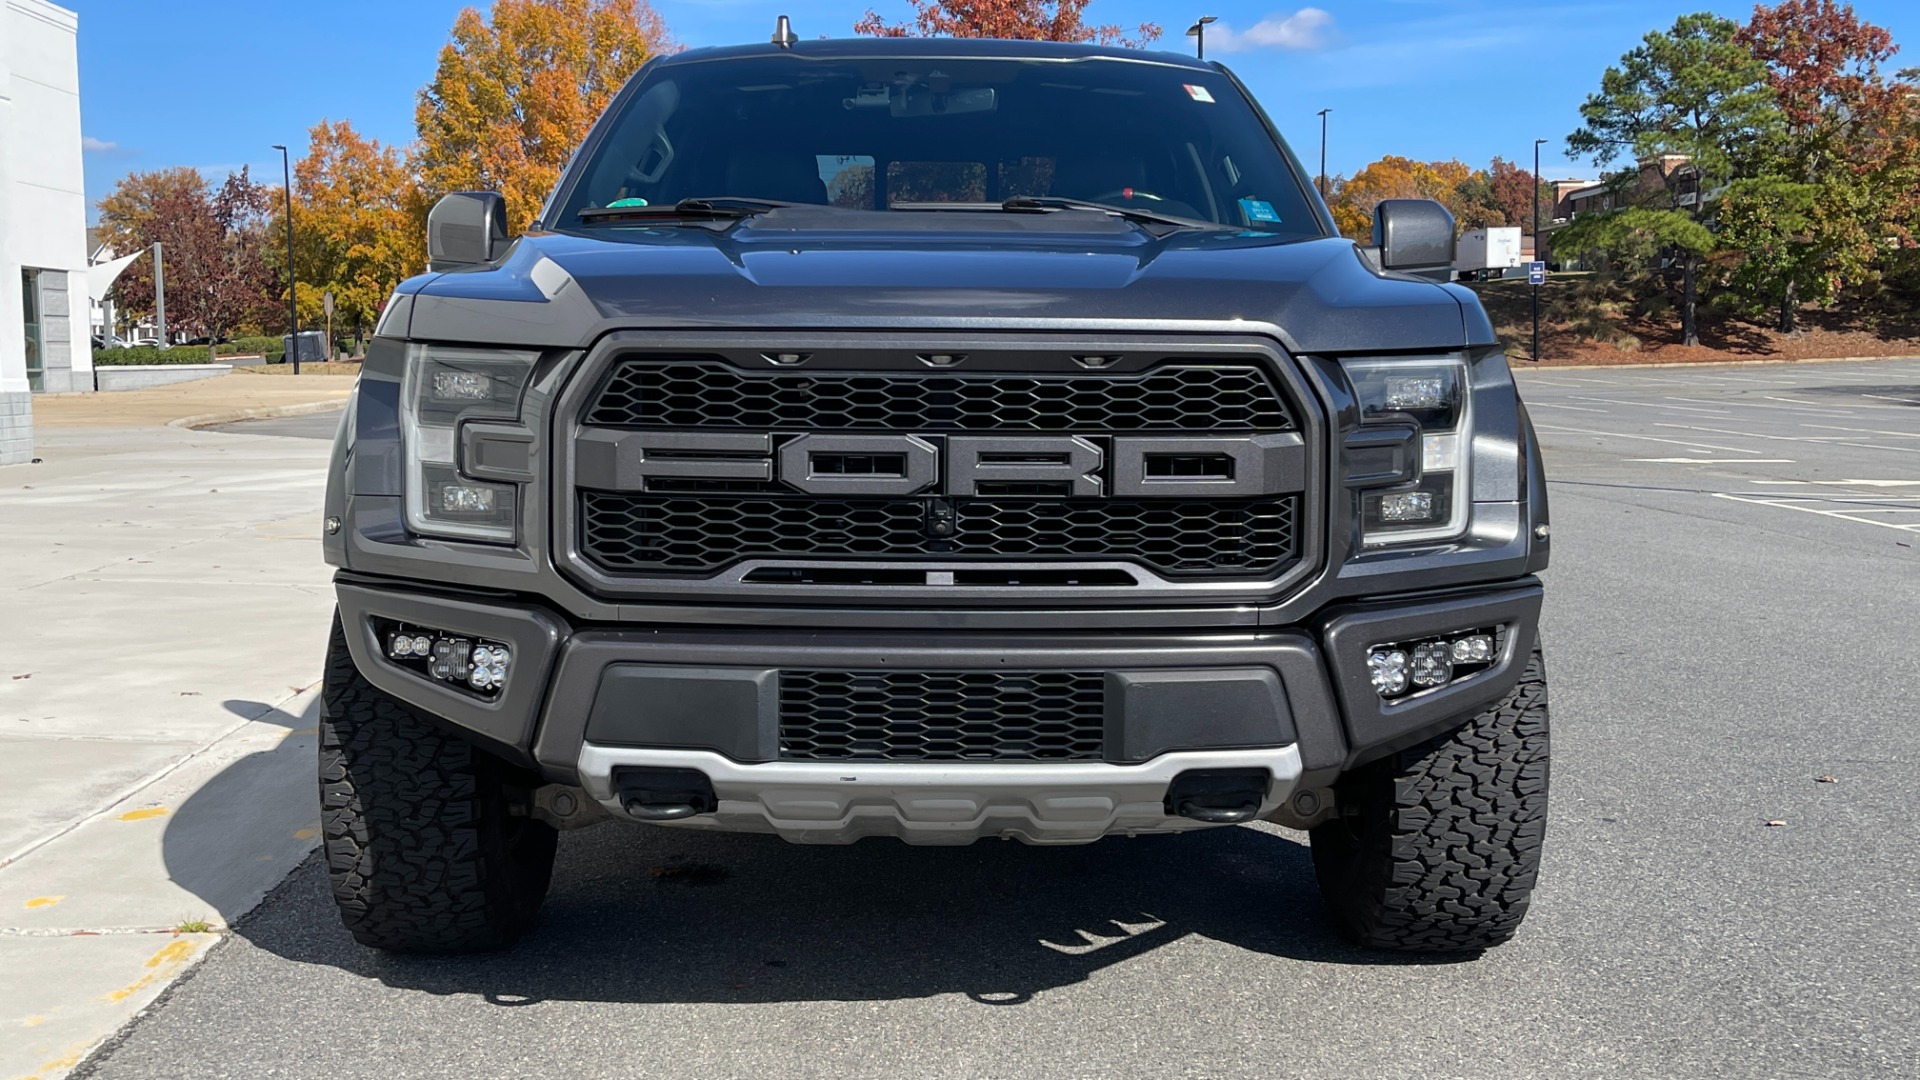 Used 2019 Ford F-150 RAPTOR / 802A PACKAGE / LIGHT PODS / CARBON FIBER / PANORAMIC ROOF for sale Sold at Formula Imports in Charlotte NC 28227 8